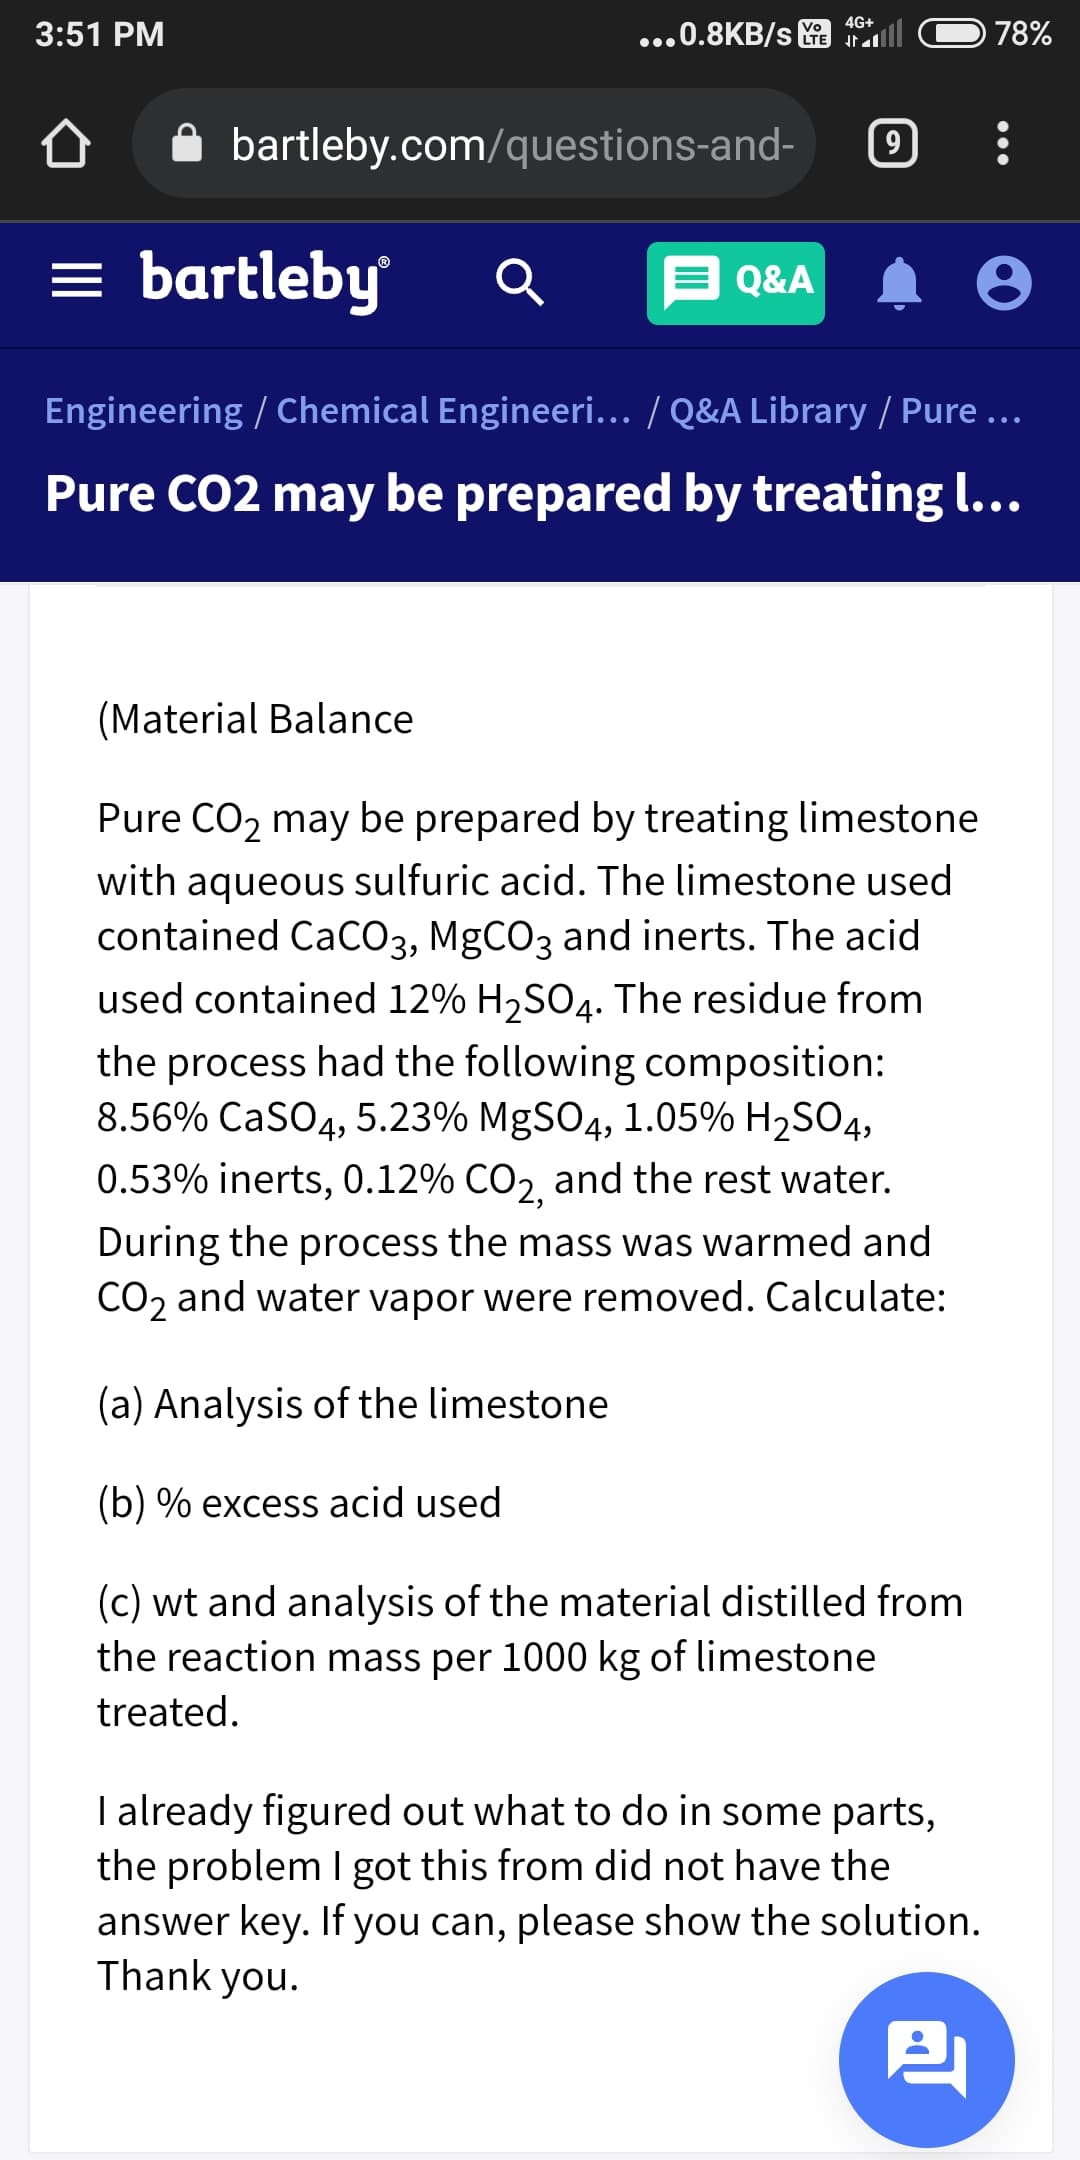 4G+
3:51 PM
...0.8KB/s
78%
bartleby.com/questions-and-
9.
= bartleby
E Q&A
Engineering / Chemical Engineeri... / Q&A Library / Pure ...
Pure CO2 may be prepared by treating l...
(Material Balance
Pure CO, may be prepared by treating limestone
with aqueous sulfuric acid. The limestone used
contained CaCO3, MgCO3 and inerts. The acid
used contained 12% H2SO4. The residue from
the process had the following composition:
8.56% CaSO4, 5.23% MgSO4, 1.05% H2SO4,
0.53% inerts, 0.12% CO2 and the rest water.
During the process the mass was warmed and
CO2 and water vapor were removed. Calculate:
(a) Analysis of the limestone
(b) % excess acid used
(c) wt and analysis of the material distilled from
the reaction mass per 1000 kg of limestone
treated.
I already figured out what to do in some parts,
the problem I got this from did not have the
answer key. If you can, please show the solution.
Thank you.
